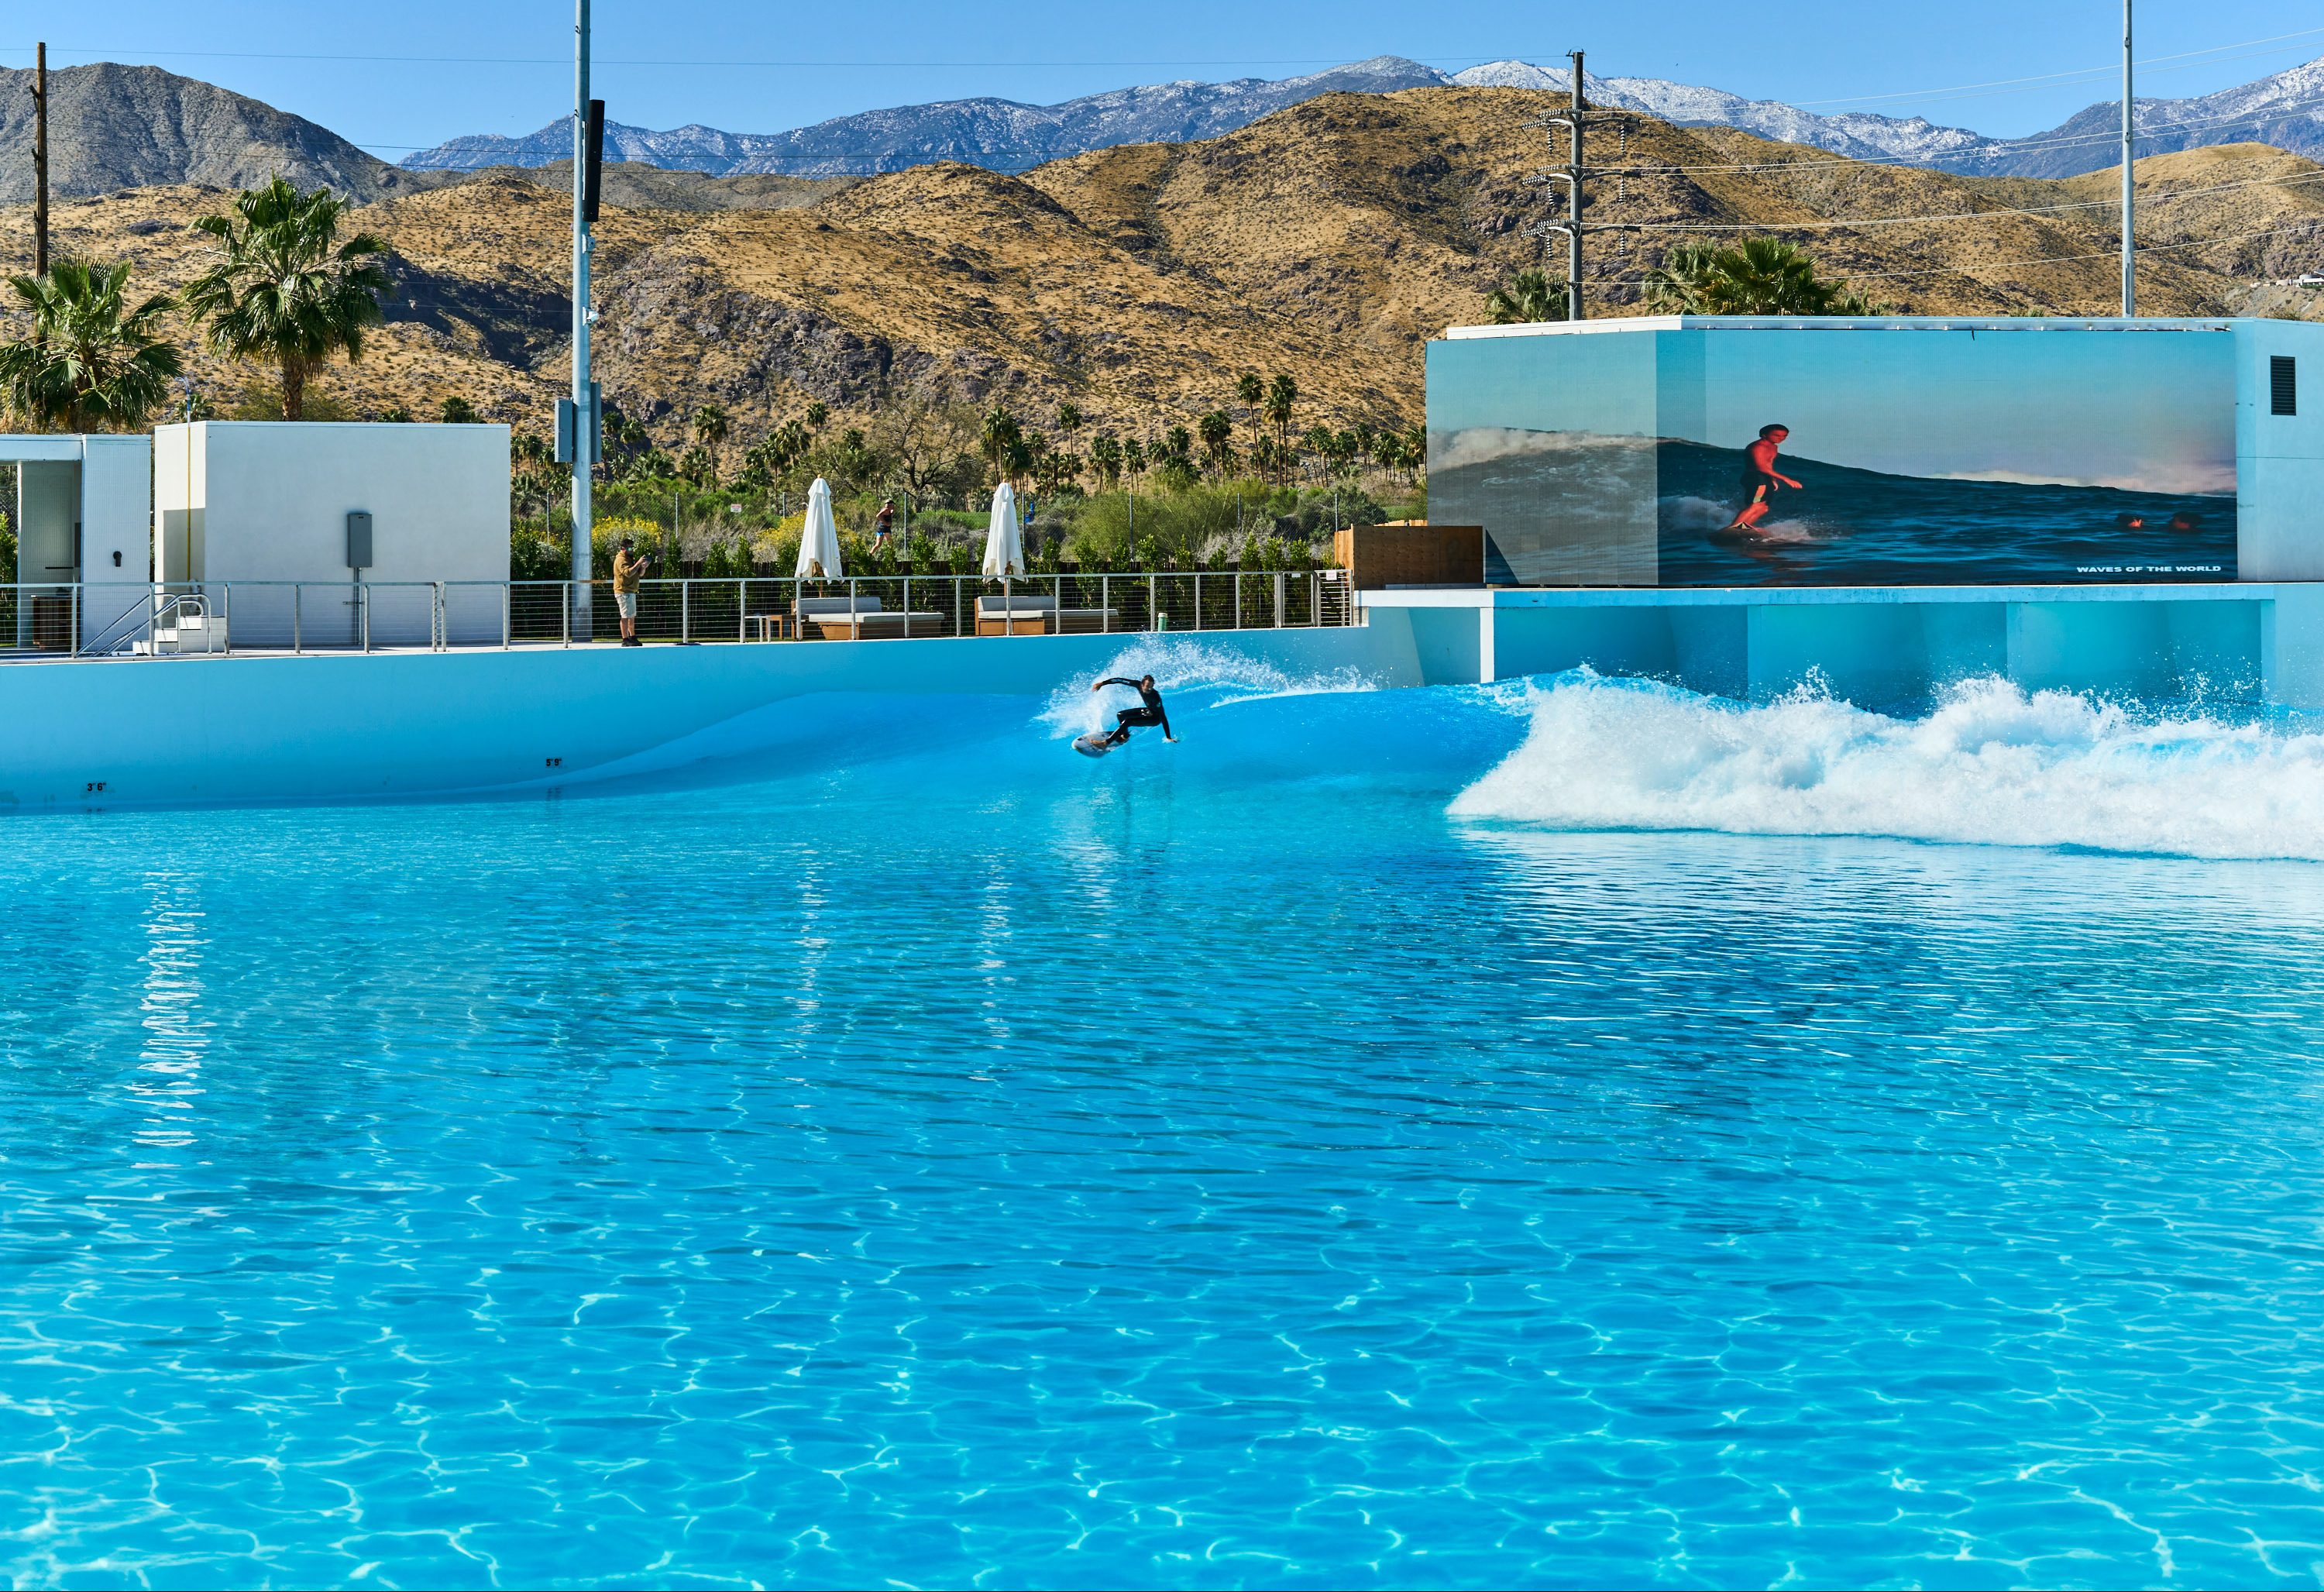 a surfer riding a wave in the pool at the Palm Springs Surf Club